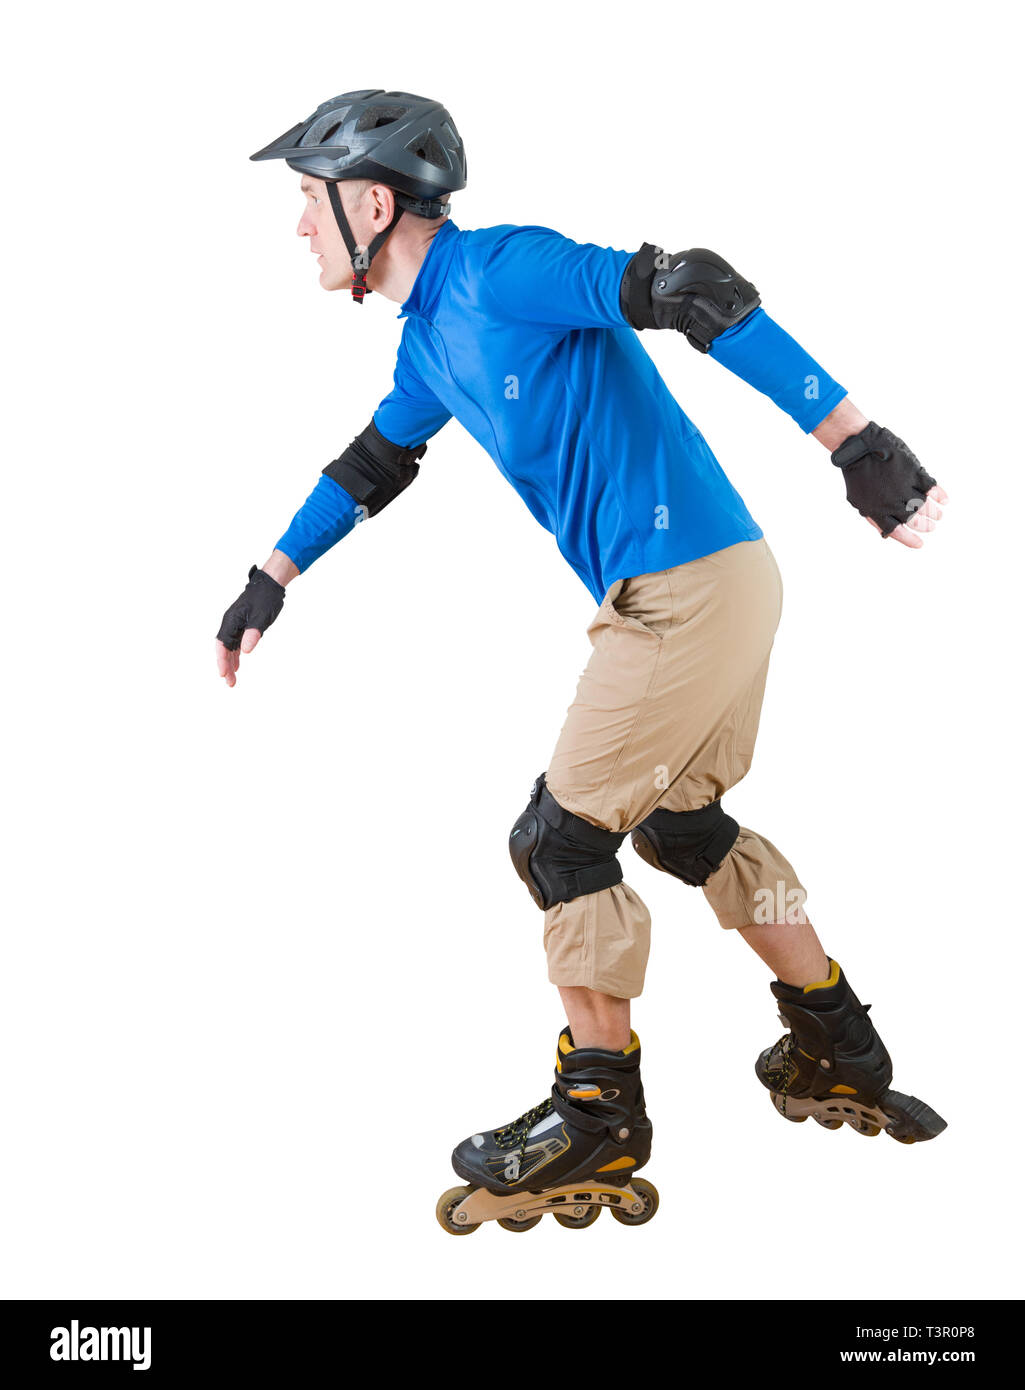 man roller skating with protective sportwear Stock Photo